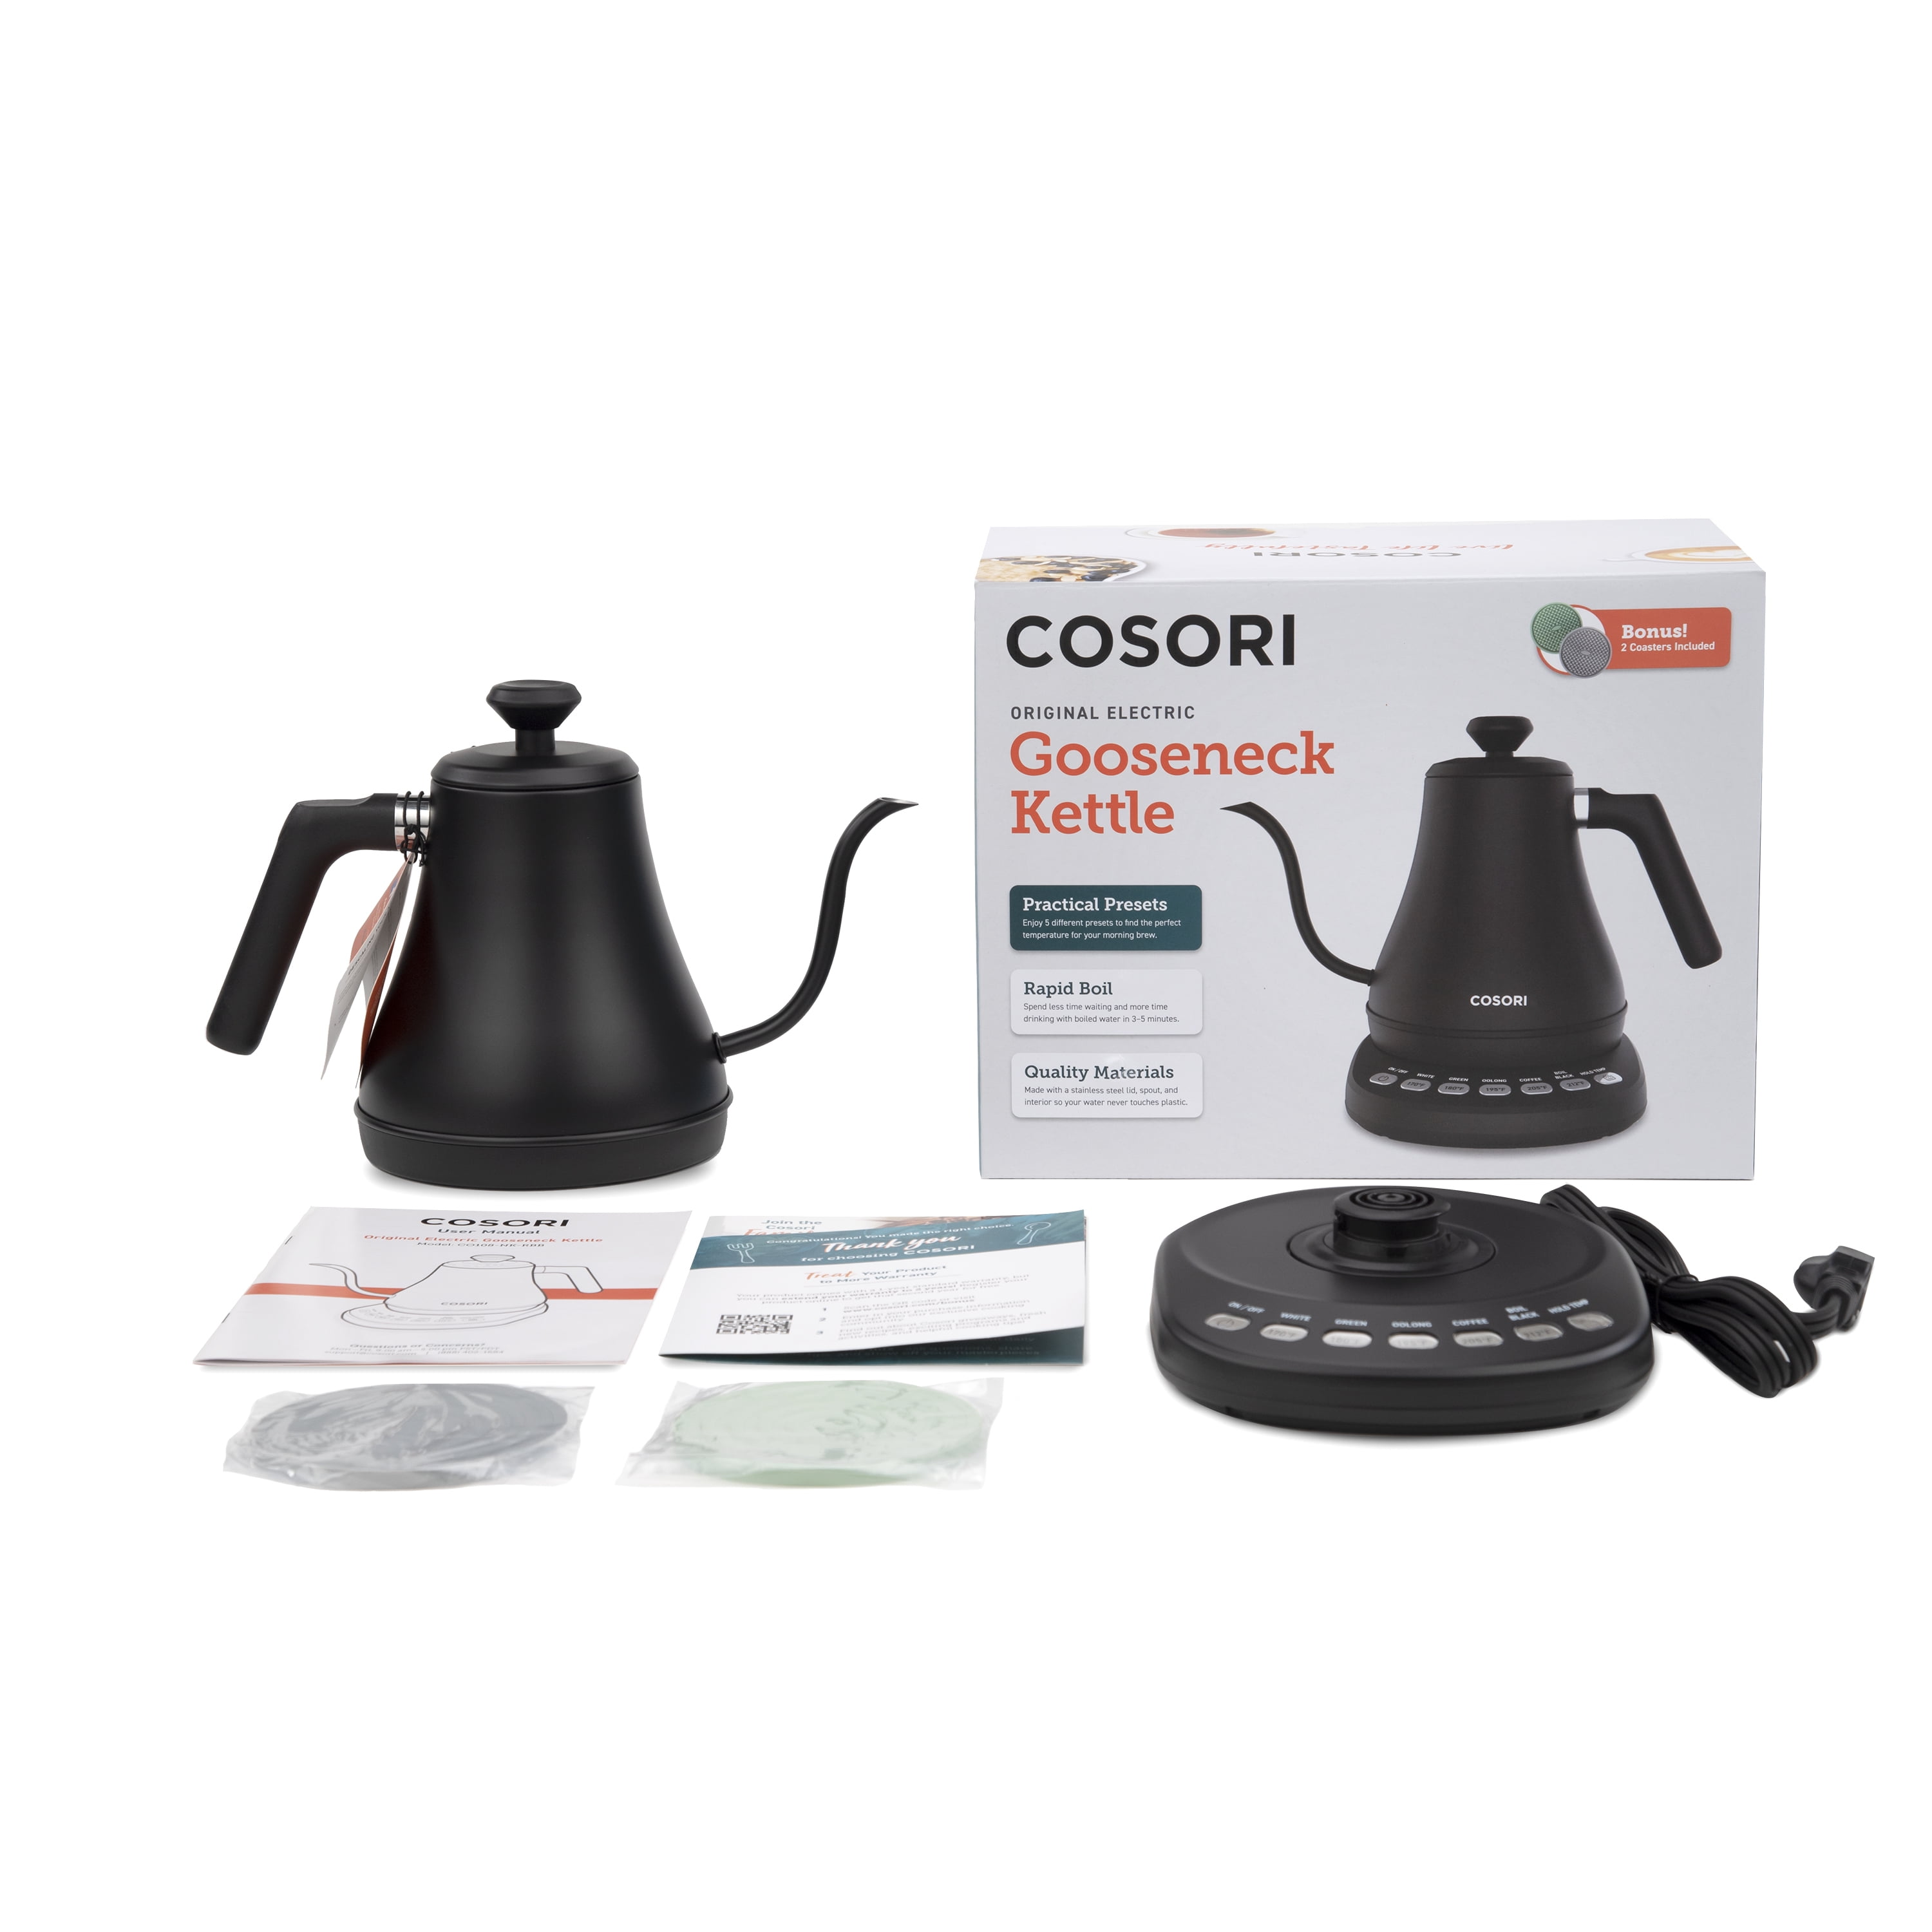 COSORI Electric Gooseneck Kettle for Sale in San Diego, CA - OfferUp